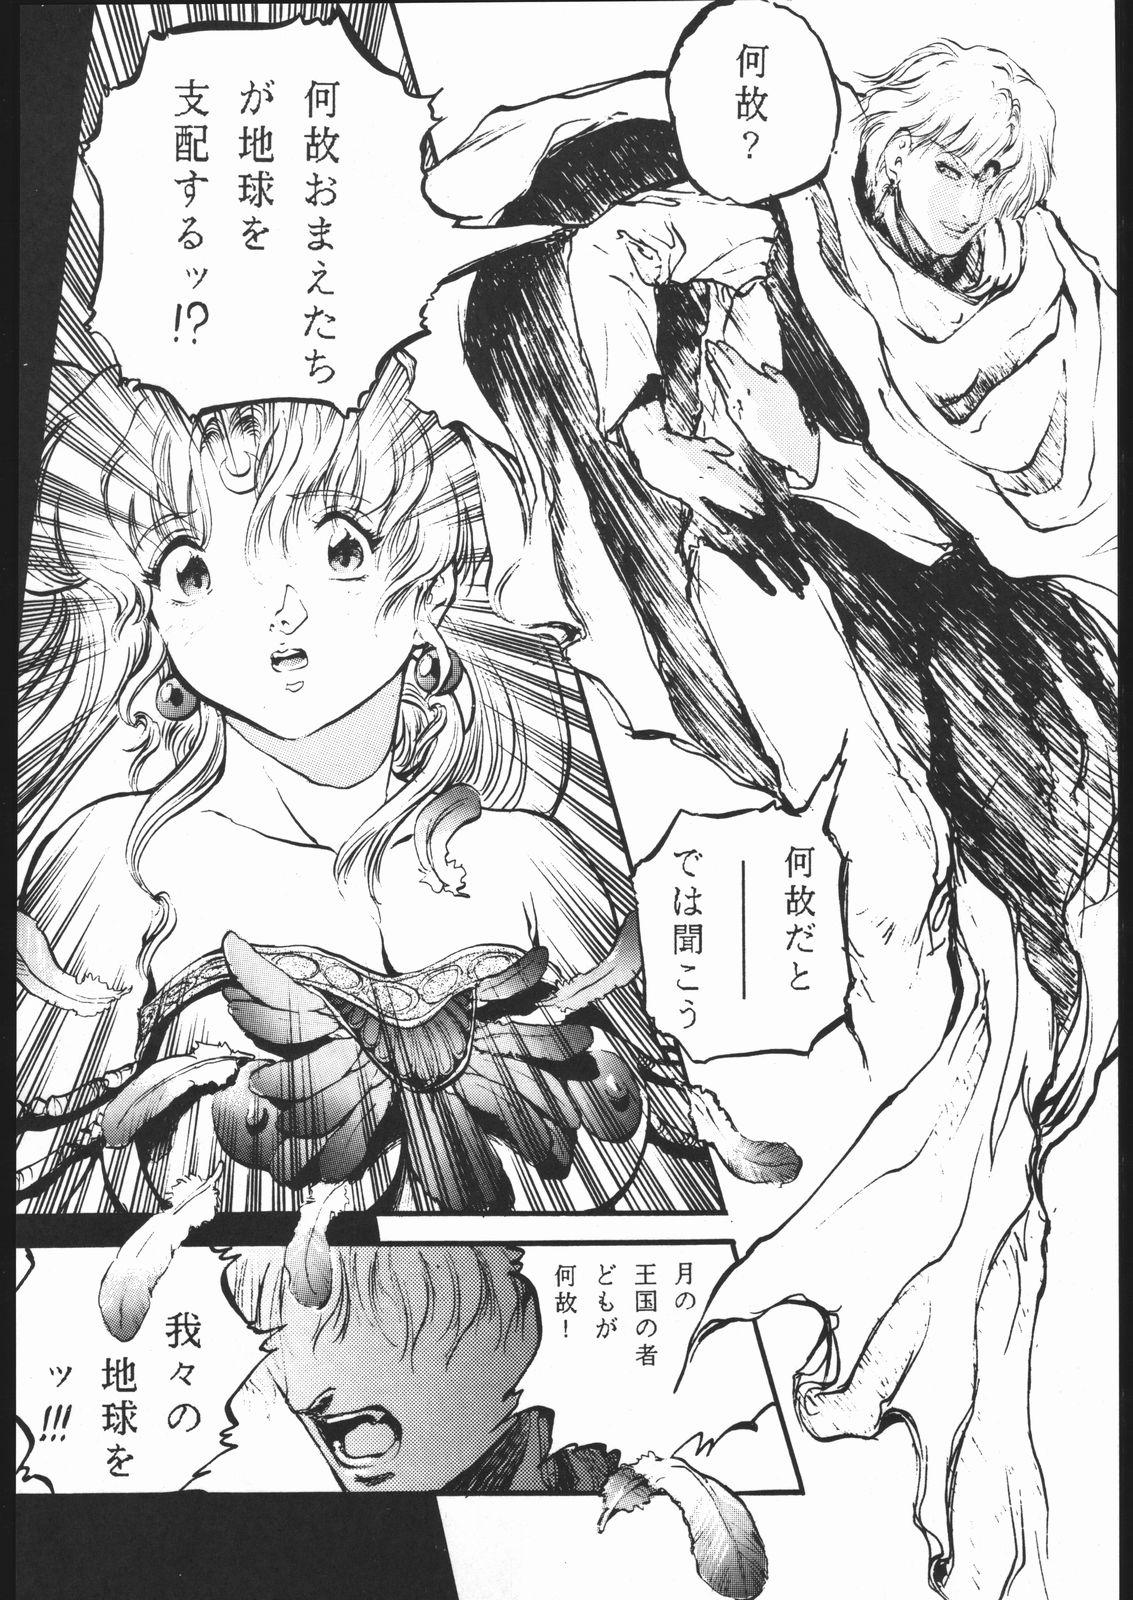 Officesex KATZE 8 - Sailor moon Tenchi muyo Ghost sweeper mikami Giant robo Victory gundam Home - Page 7